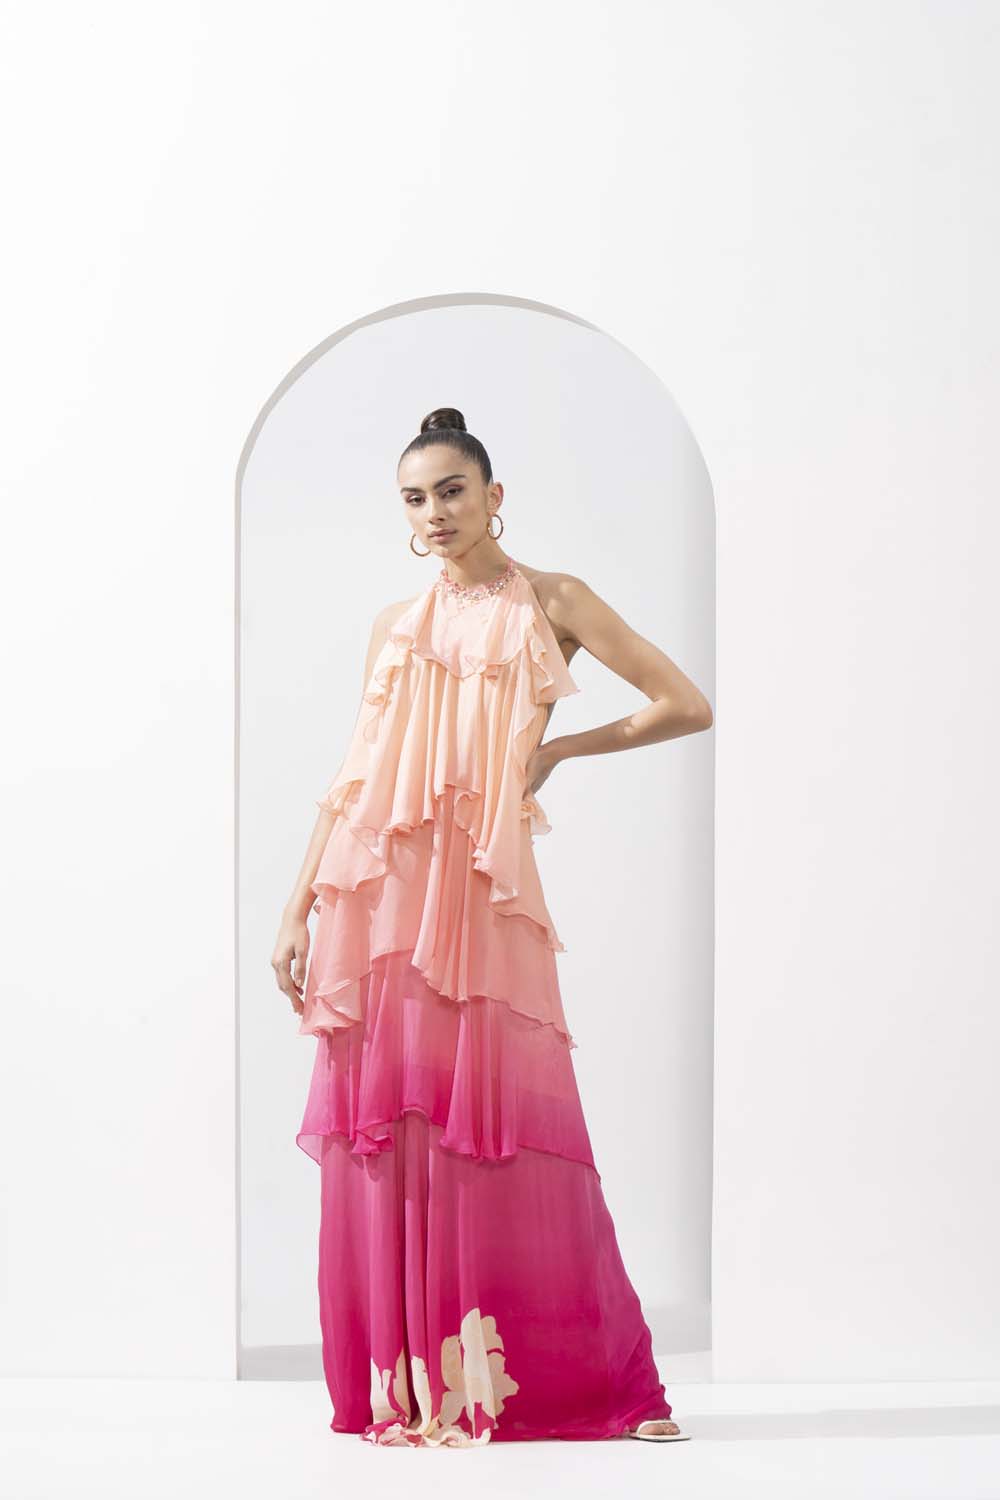 Ombre placement printed chiffon tiered dress with delicate hand embroidery on the neckline.